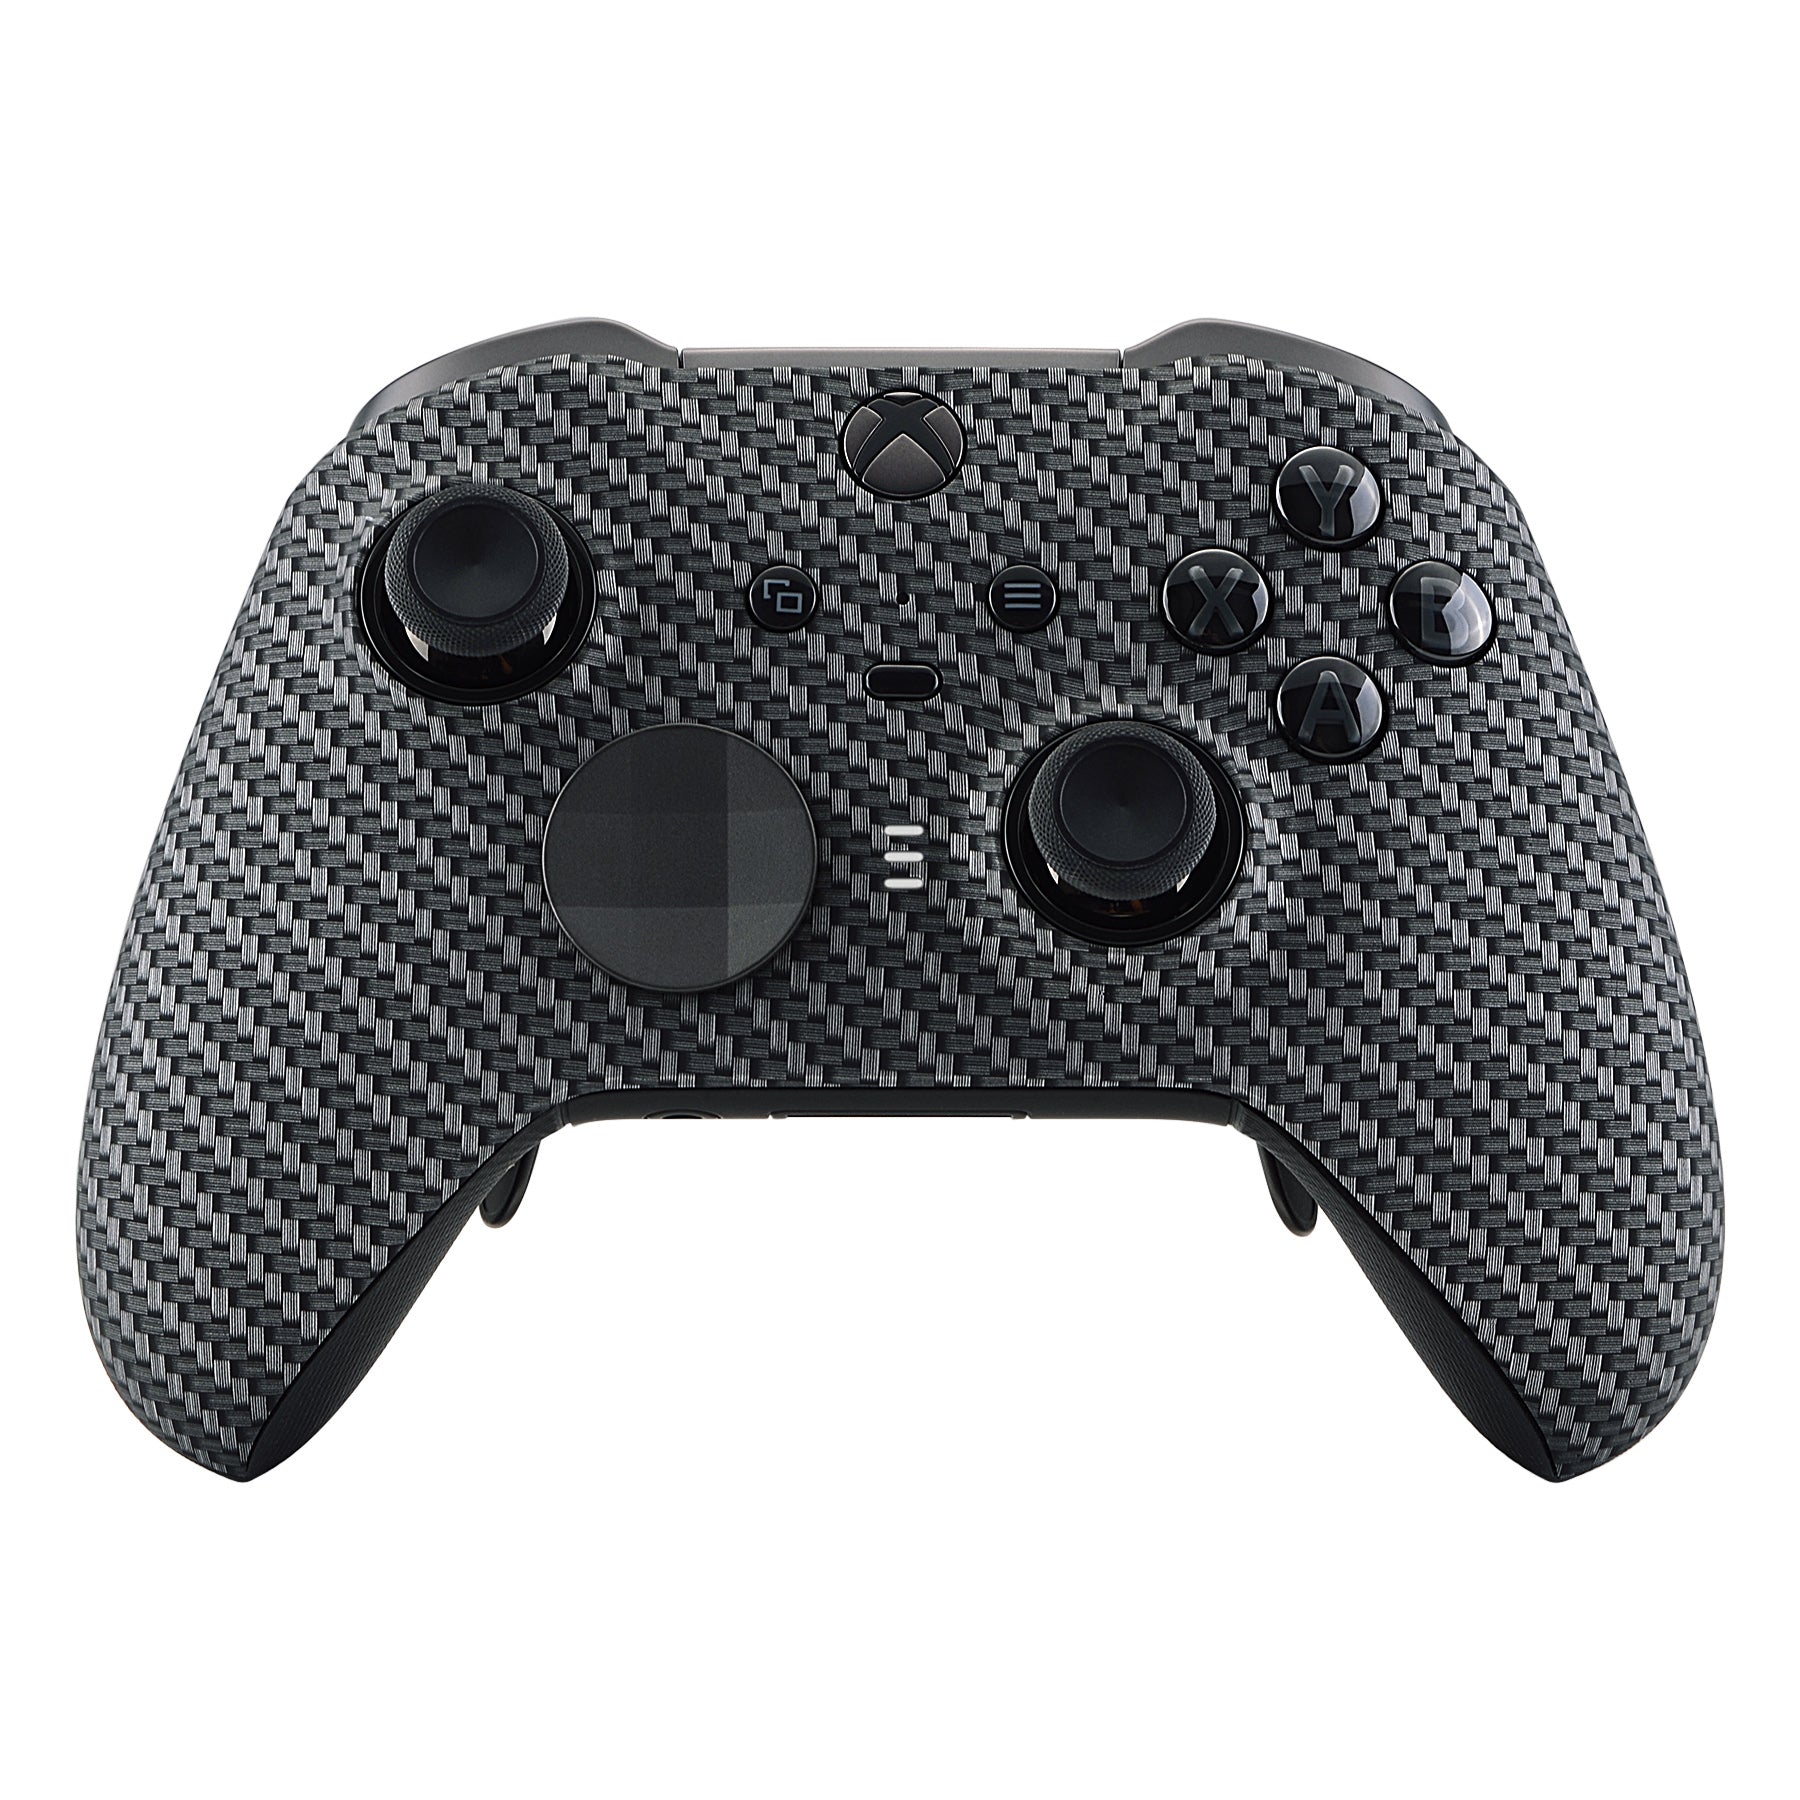 eXtremeRate Retail Black Silver Carbon Fiber Patterned Faceplate Cover, Soft Touch Front Housing Shell Case Replacement Kit for Xbox One Elite Series 2 Controller (Model 1797 and Core Model 1797) - Thumbstick Accent Rings Included - ELS209